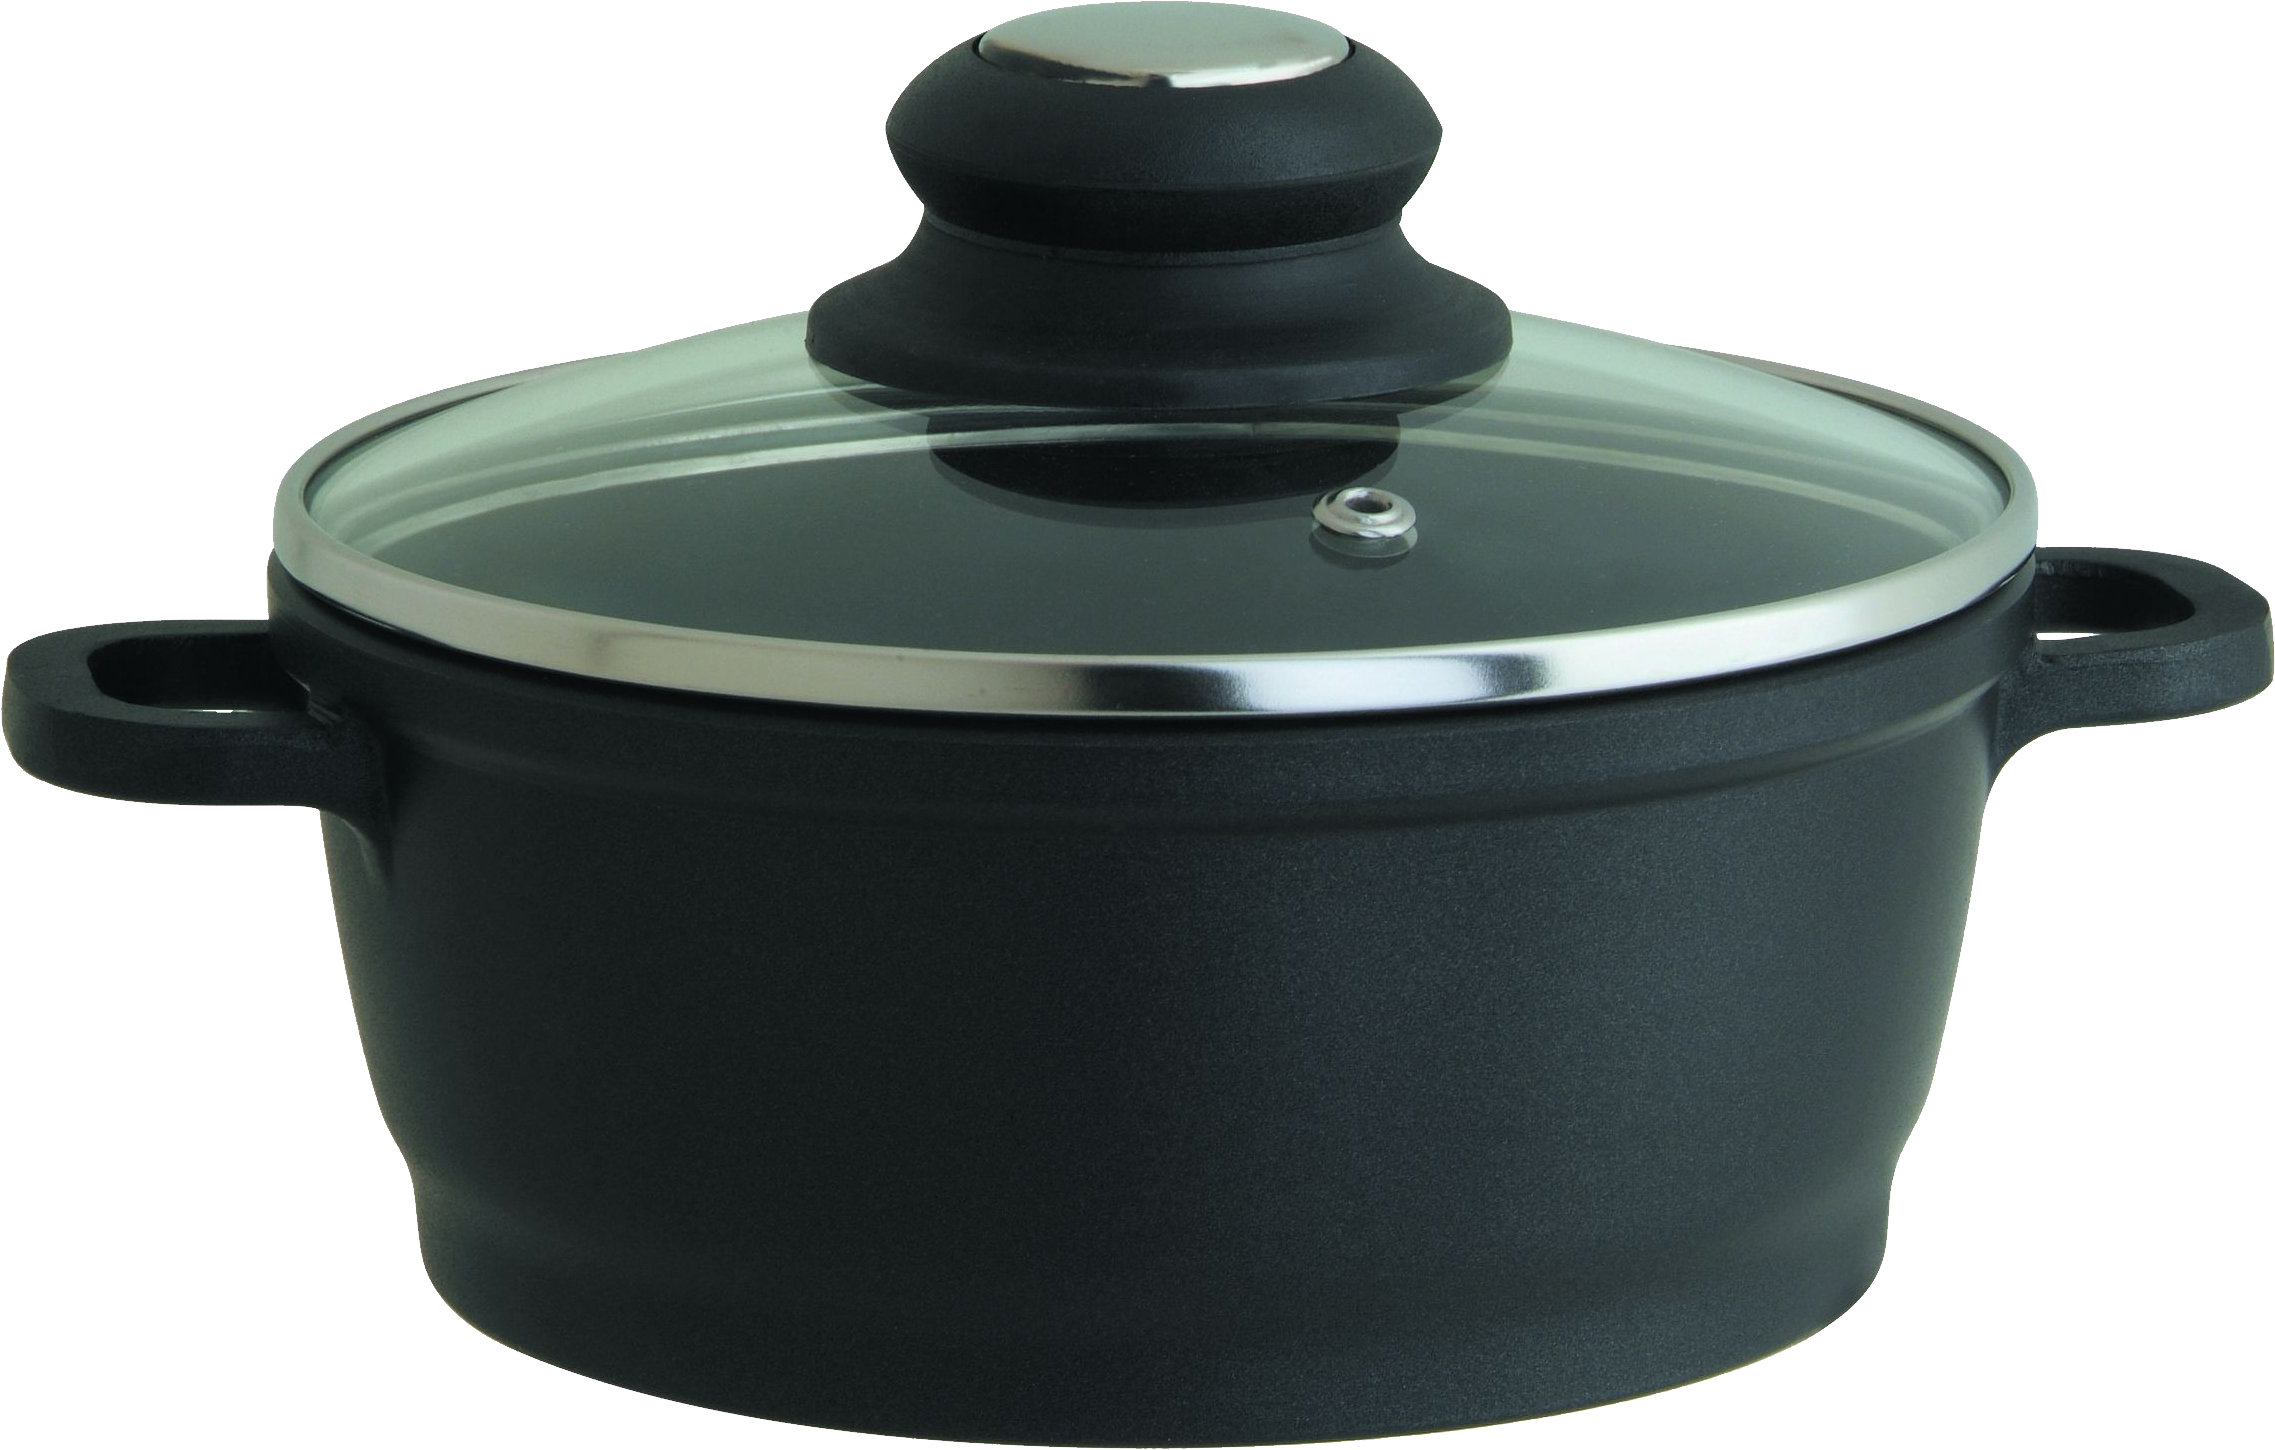 Pot And Pan Png Cooking Pan Png Image Without Background 90300 2275 